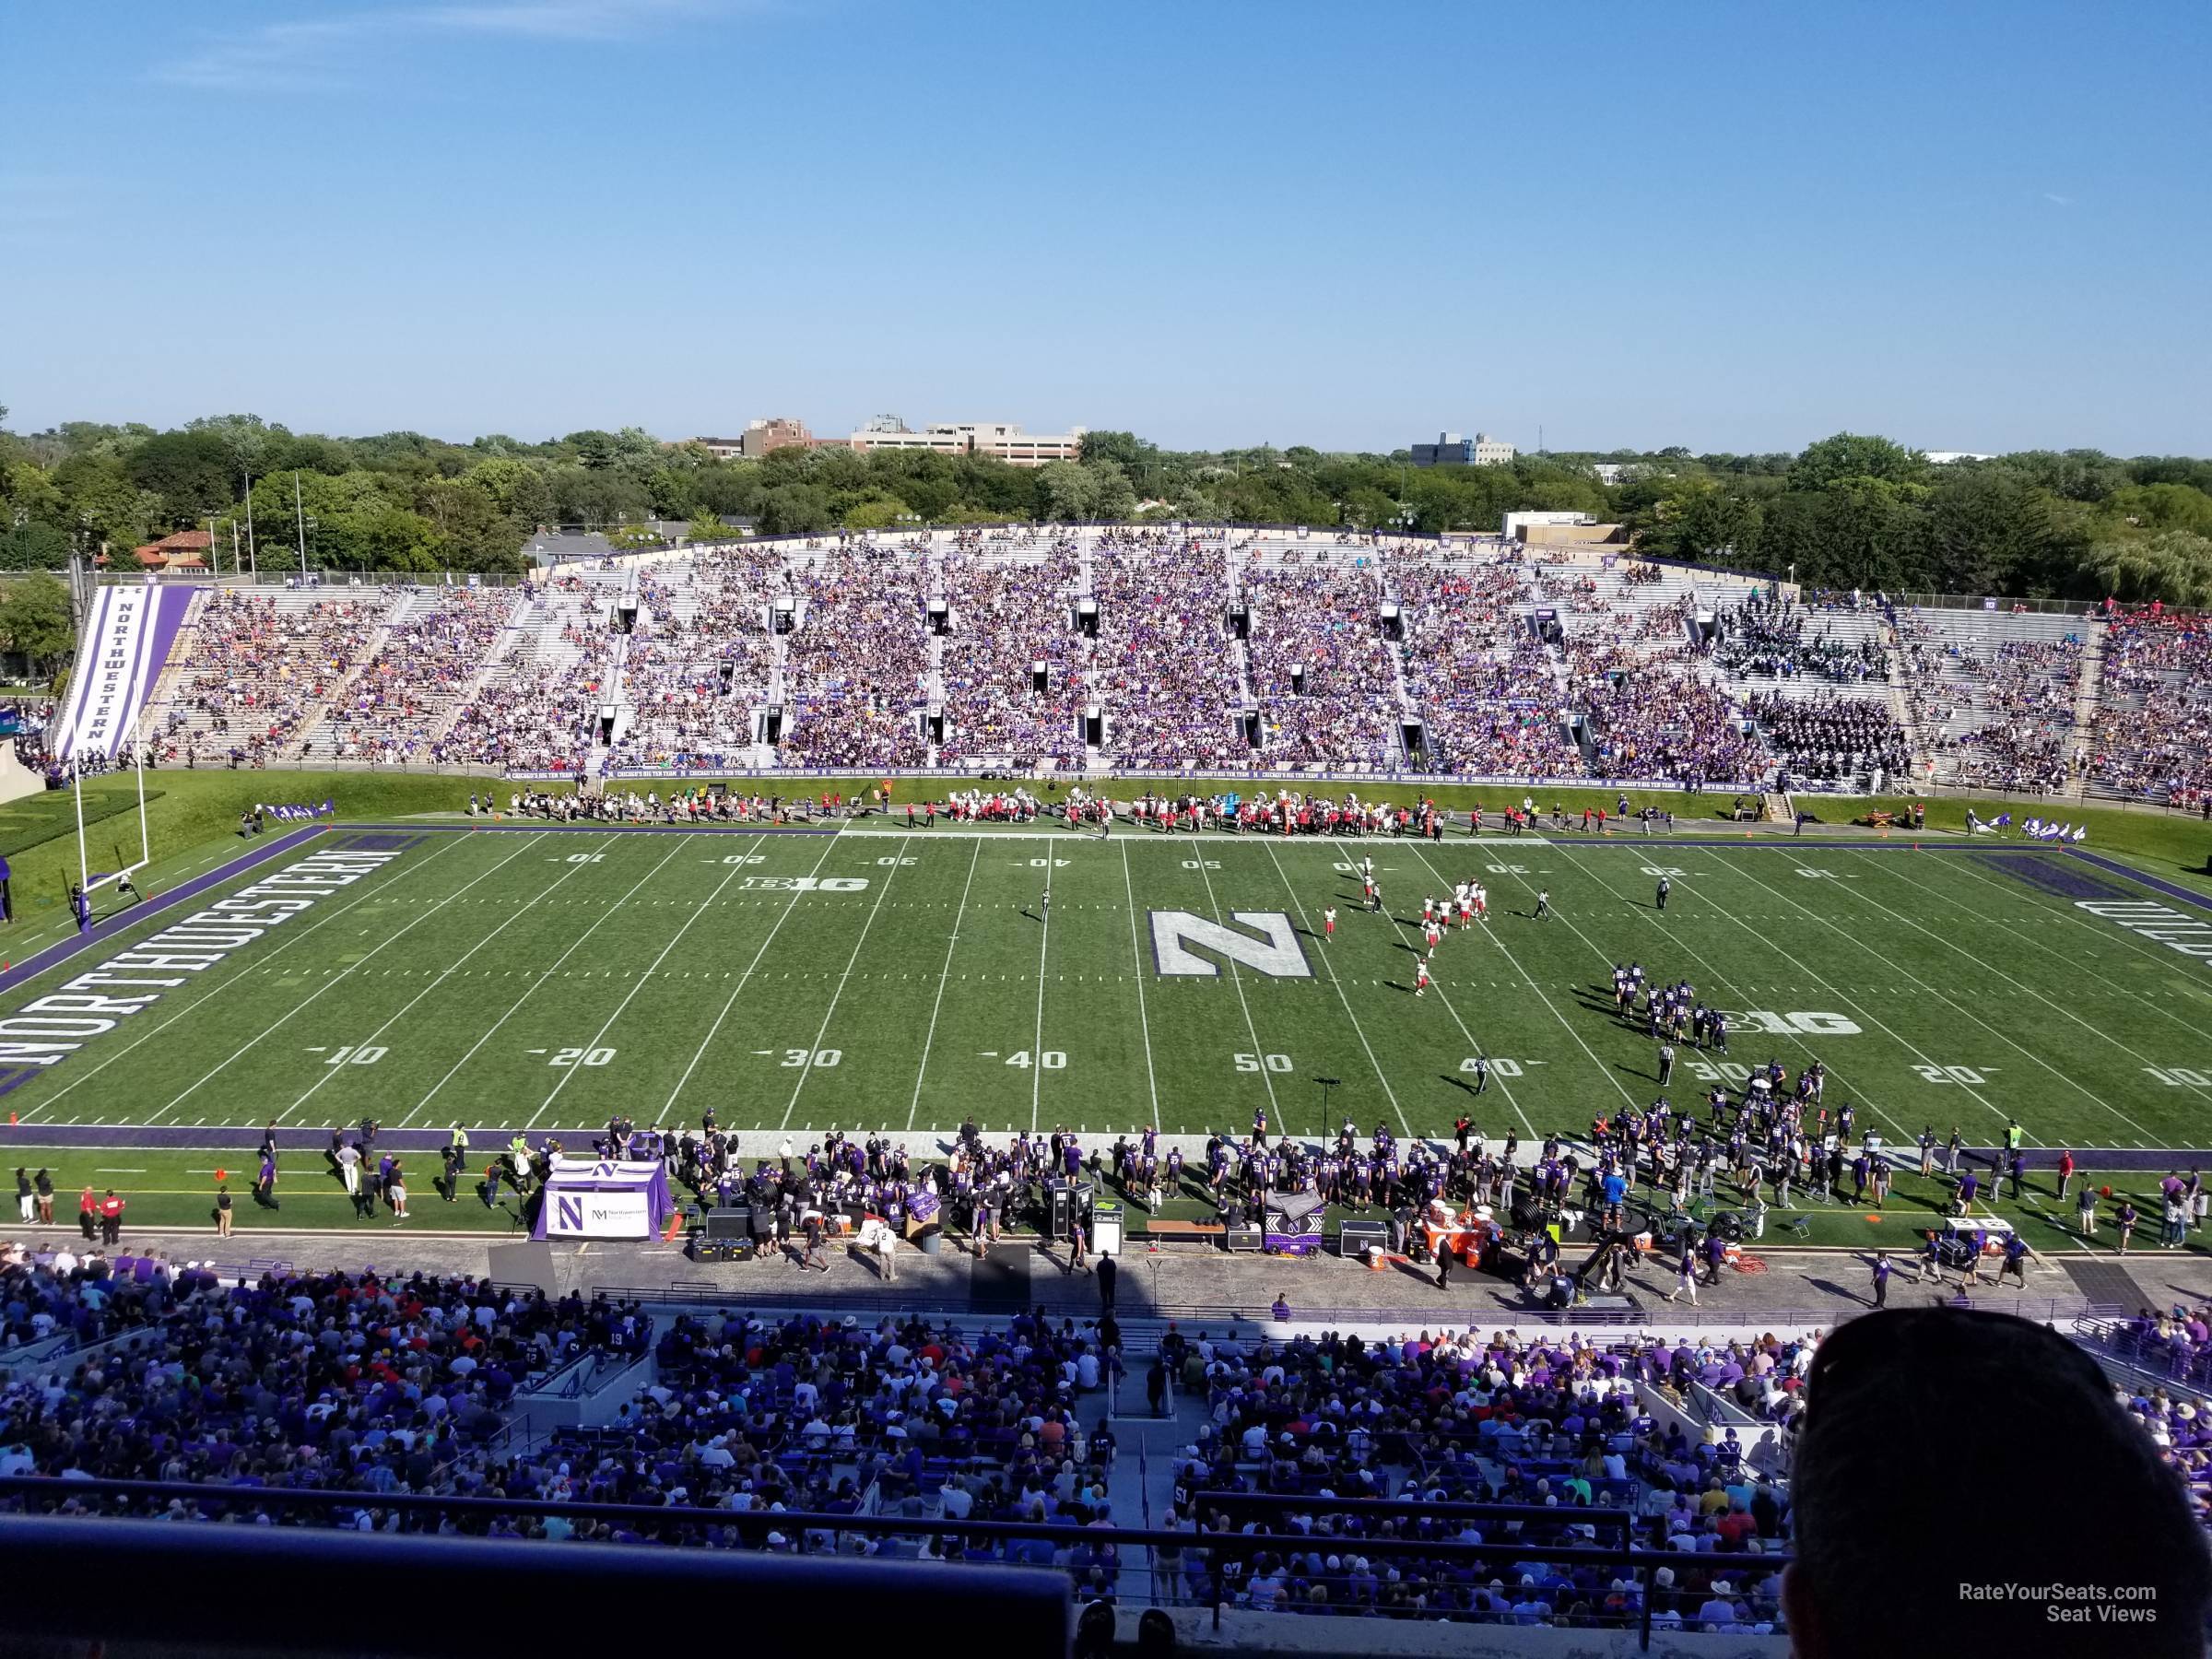 section 230, row 30 seat view  - ryan field